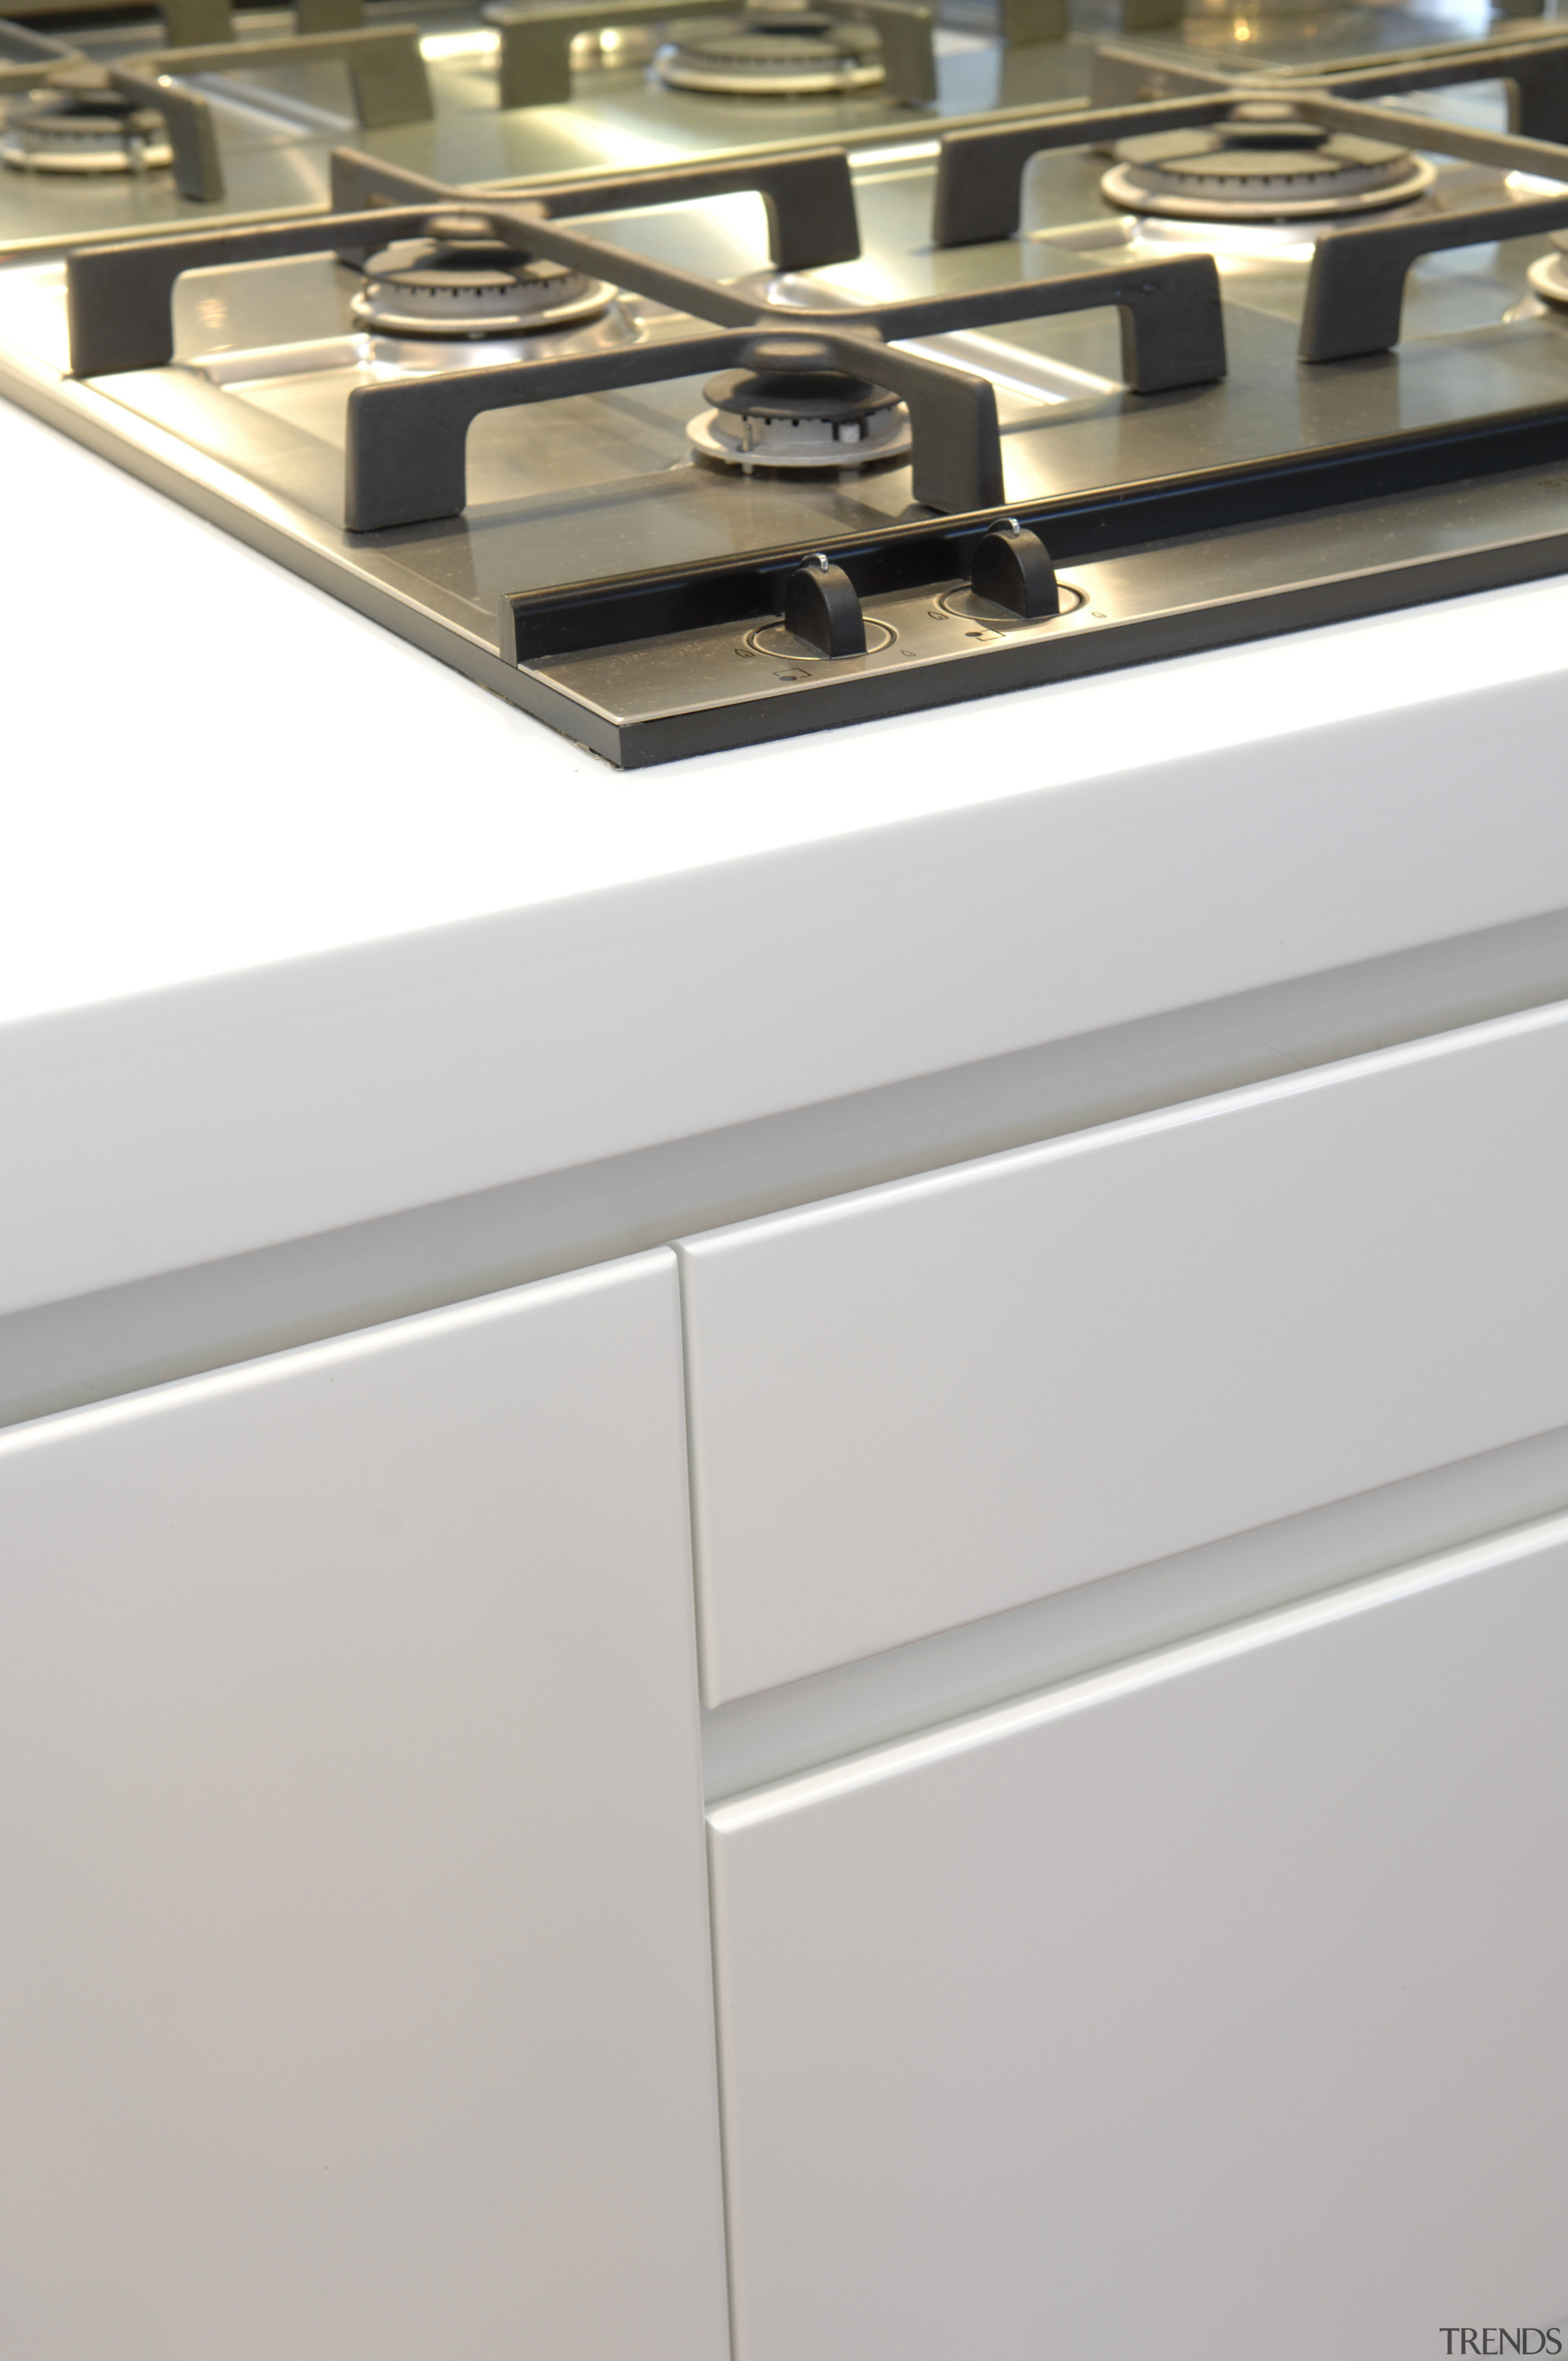 View of a gas cooktop which is part countertop, furniture, product design, gray